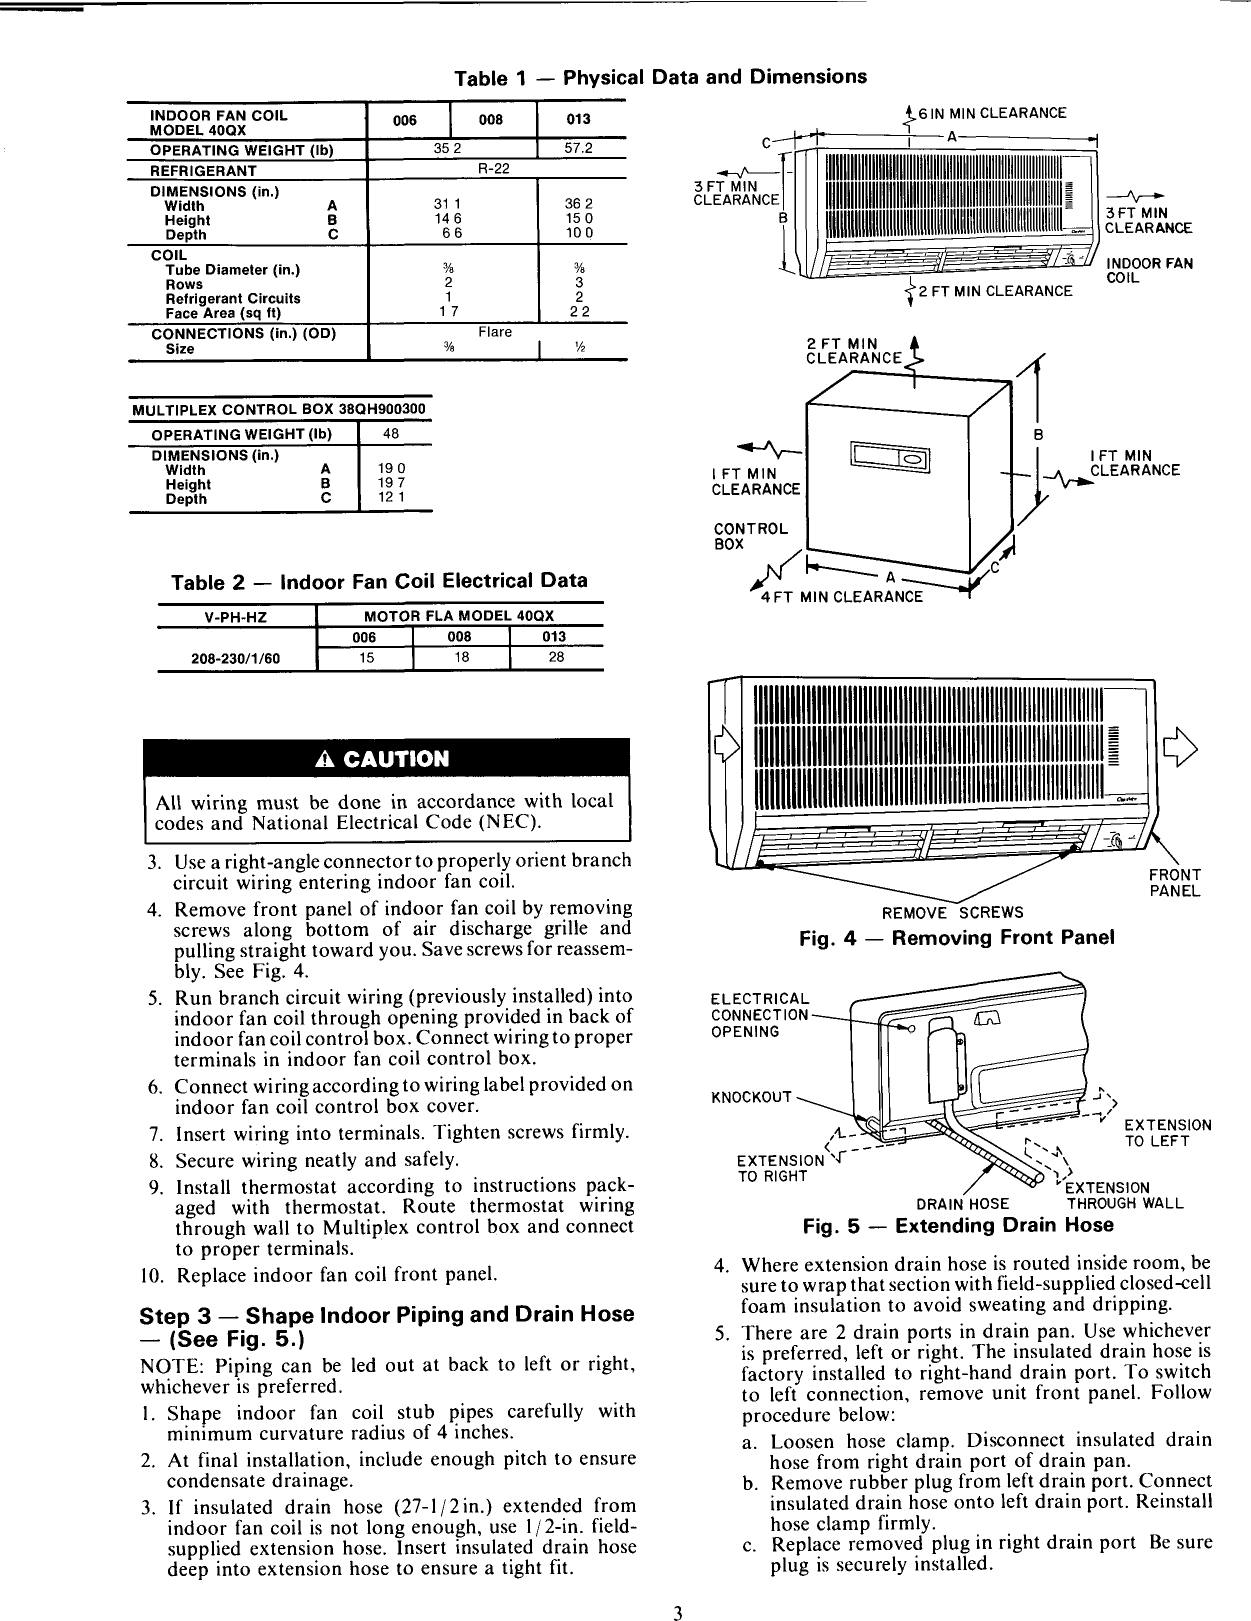 Page 3 of 8 - Carrier Carrier-Air-Cooled-Condensing-Unit-38Eh-Users-Manual-  Carrier-air-cooled-condensing-unit-38eh-users-manual